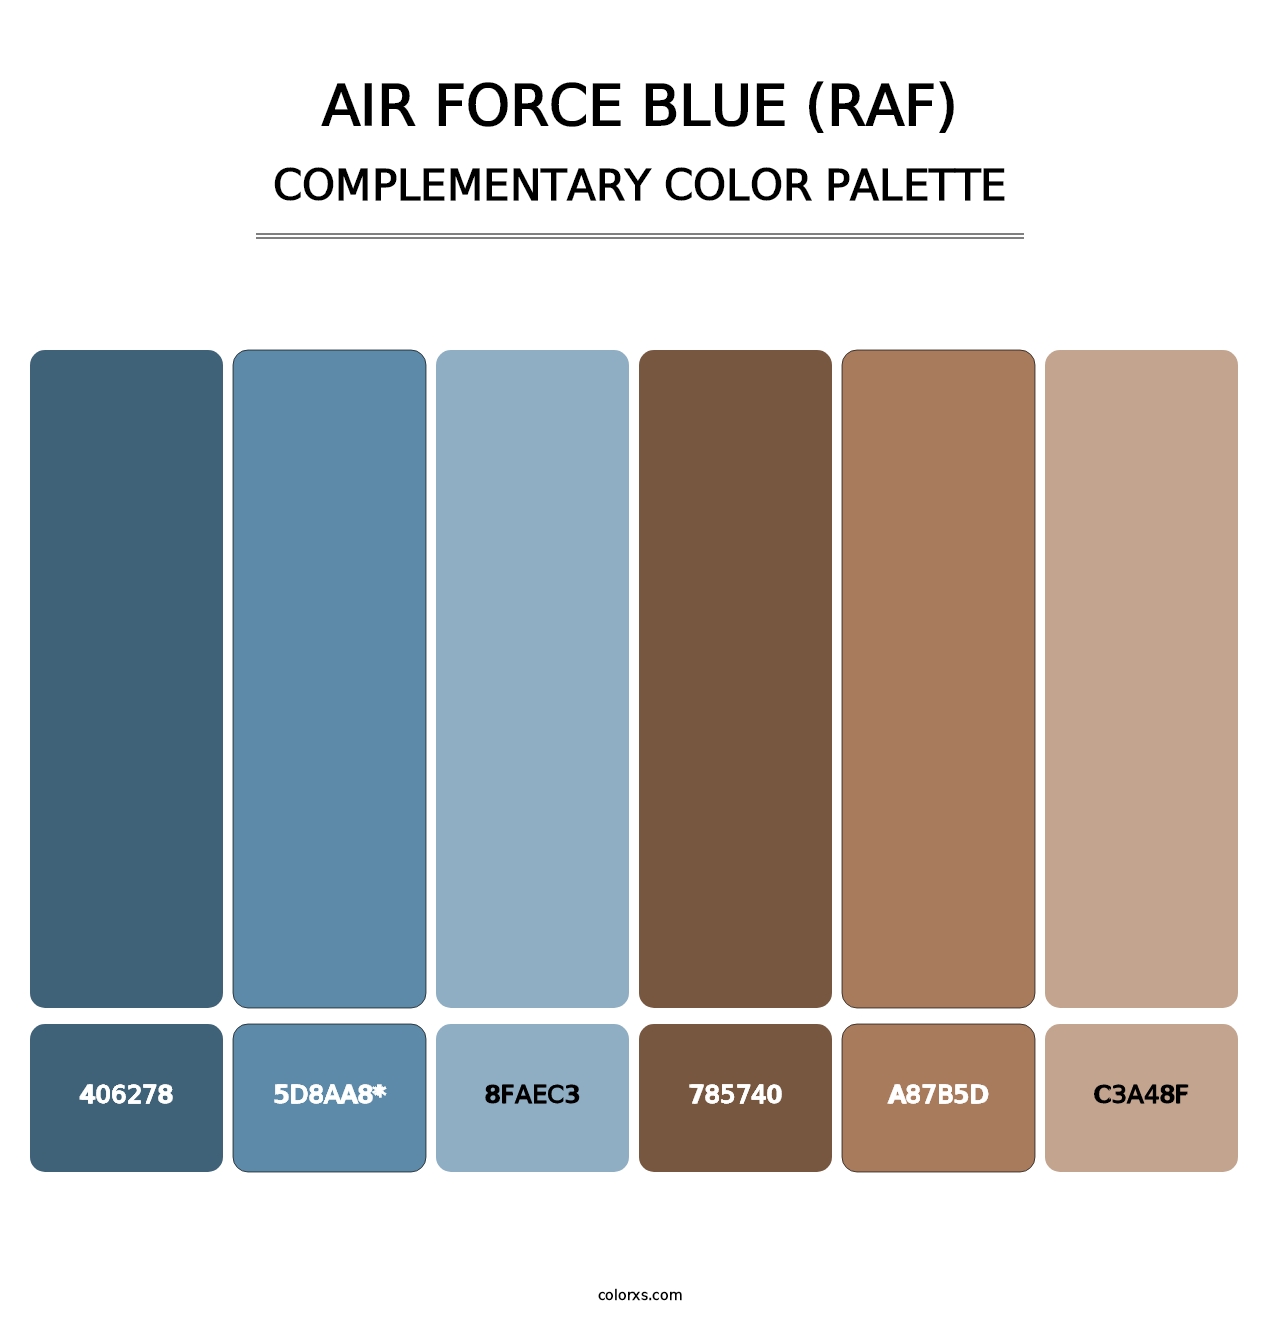 Air Force Blue (RAF) - Complementary Color Palette